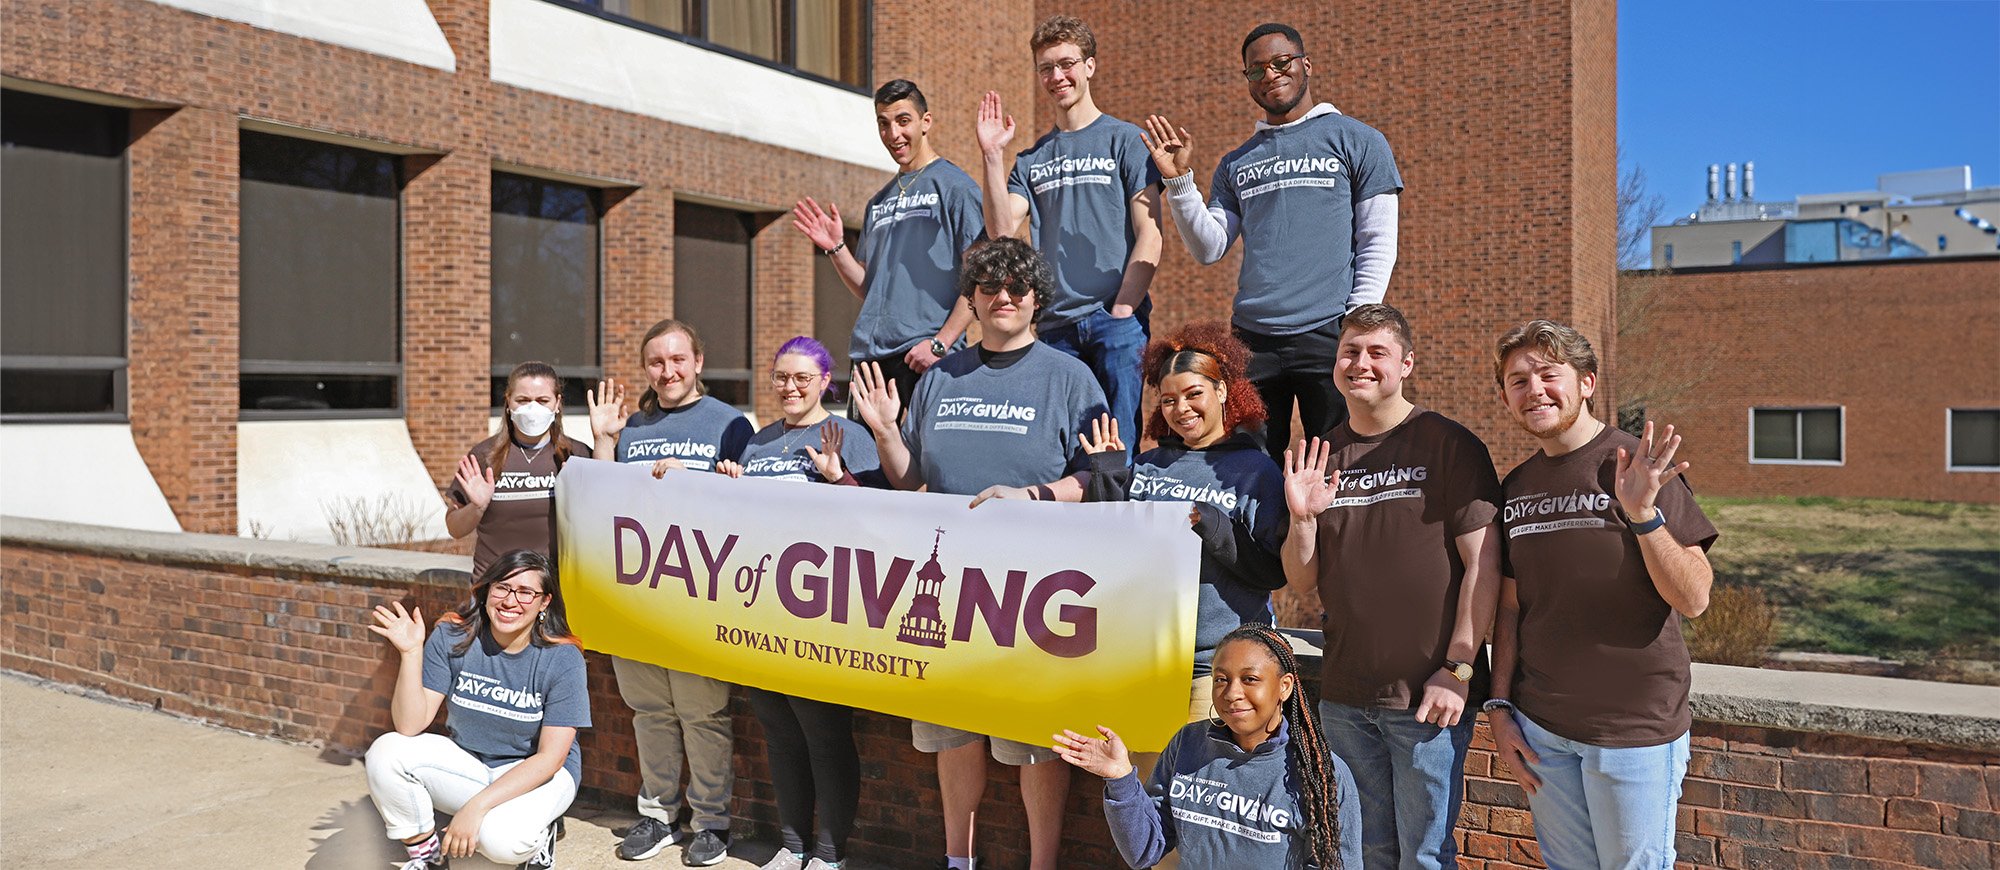 Twelve Rowan University Students stand holding a Day of Giving Banner.